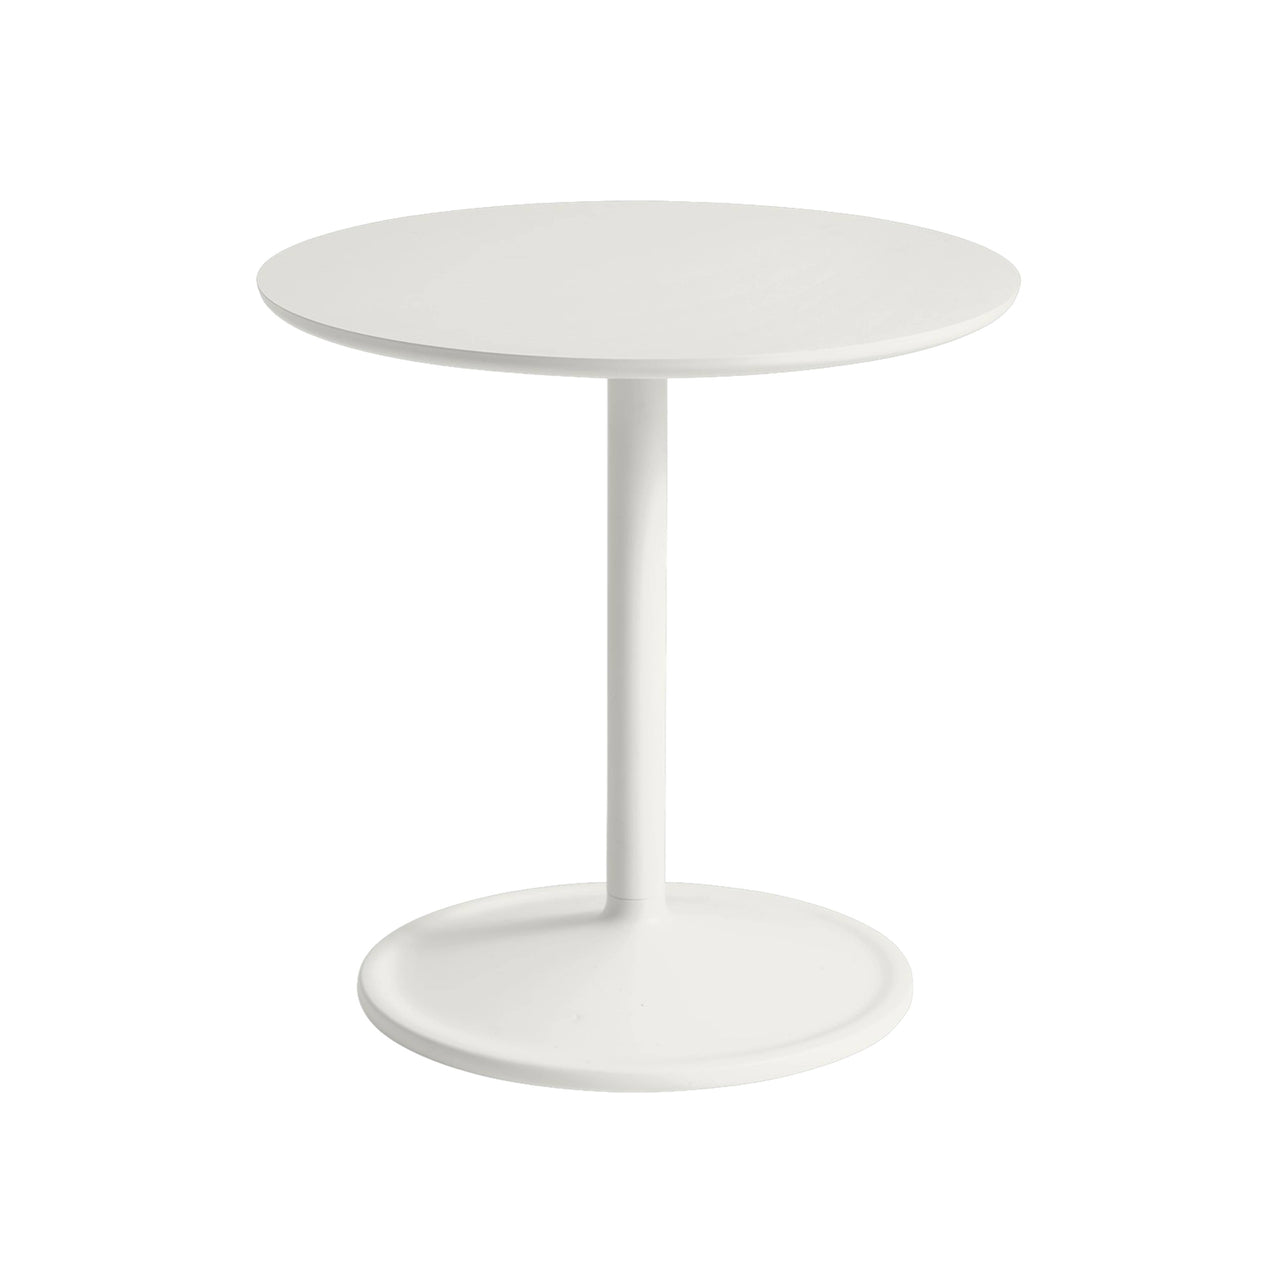 Soft Side Table: Large - 18.9